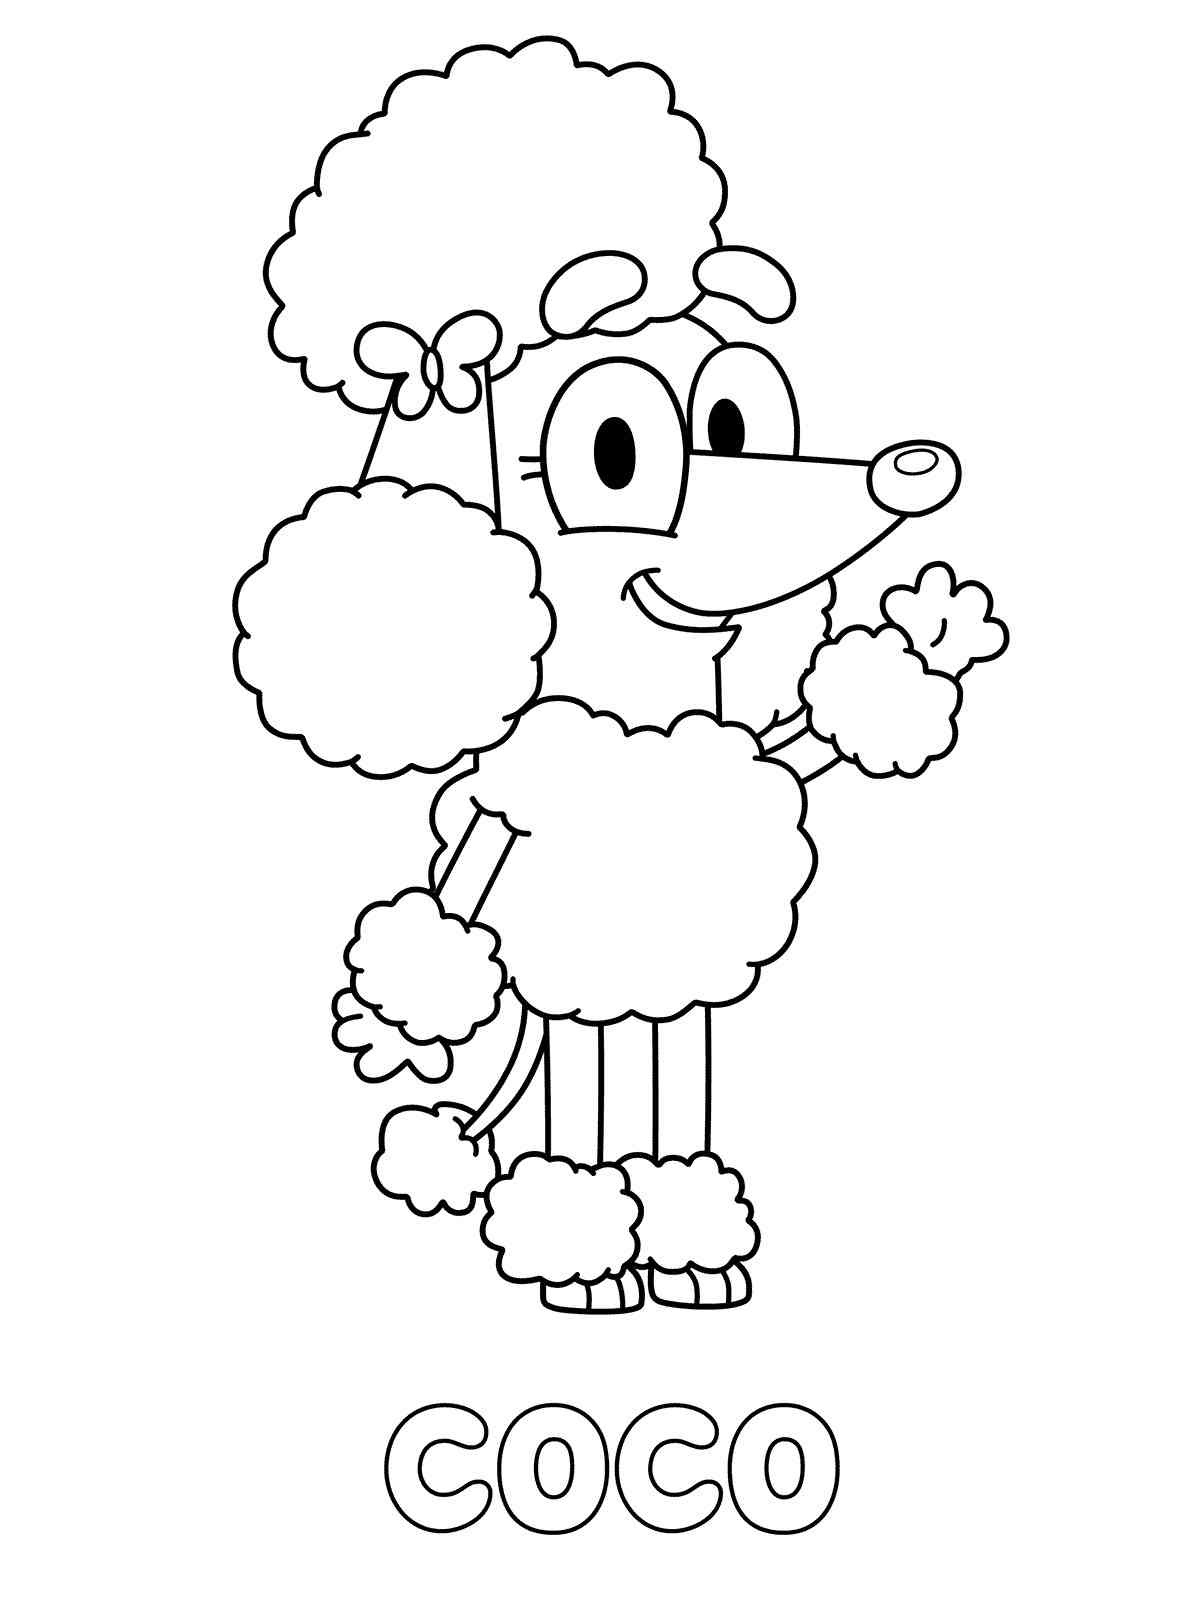 Coco from Bluey coloring page